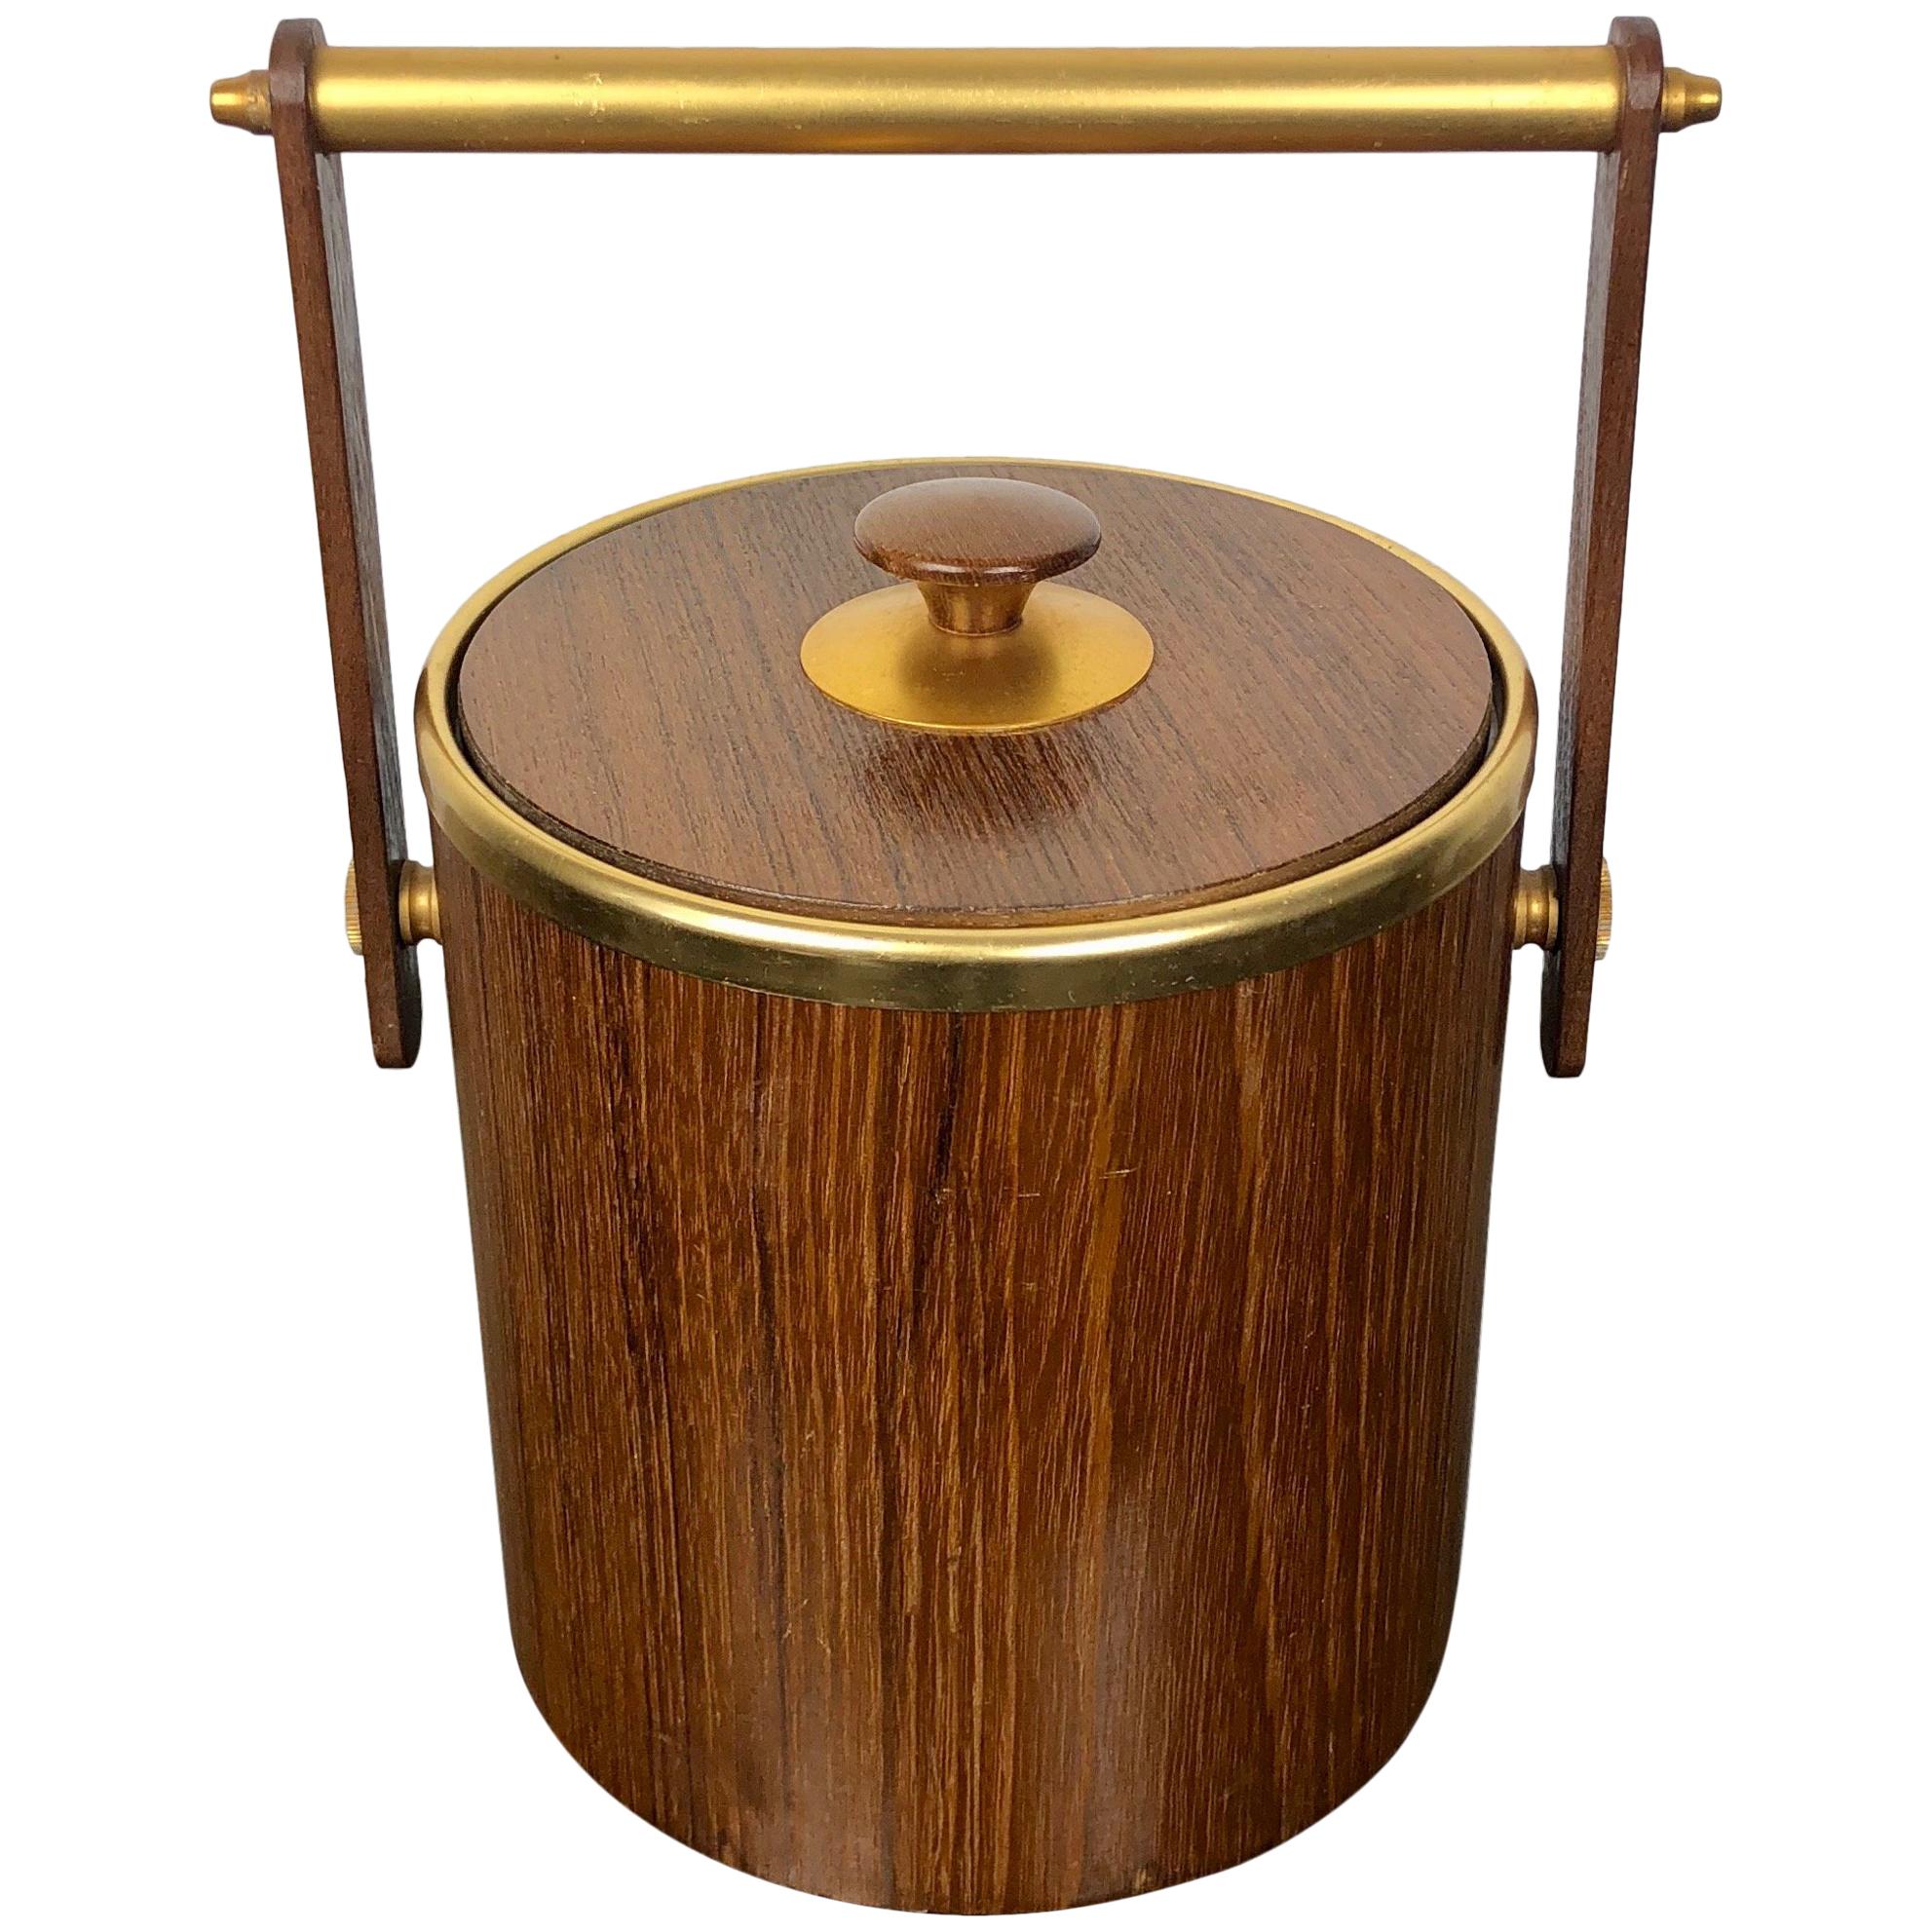 Teak and Gold Metal Ice Bucket Holder, Made in Italy, 1960s